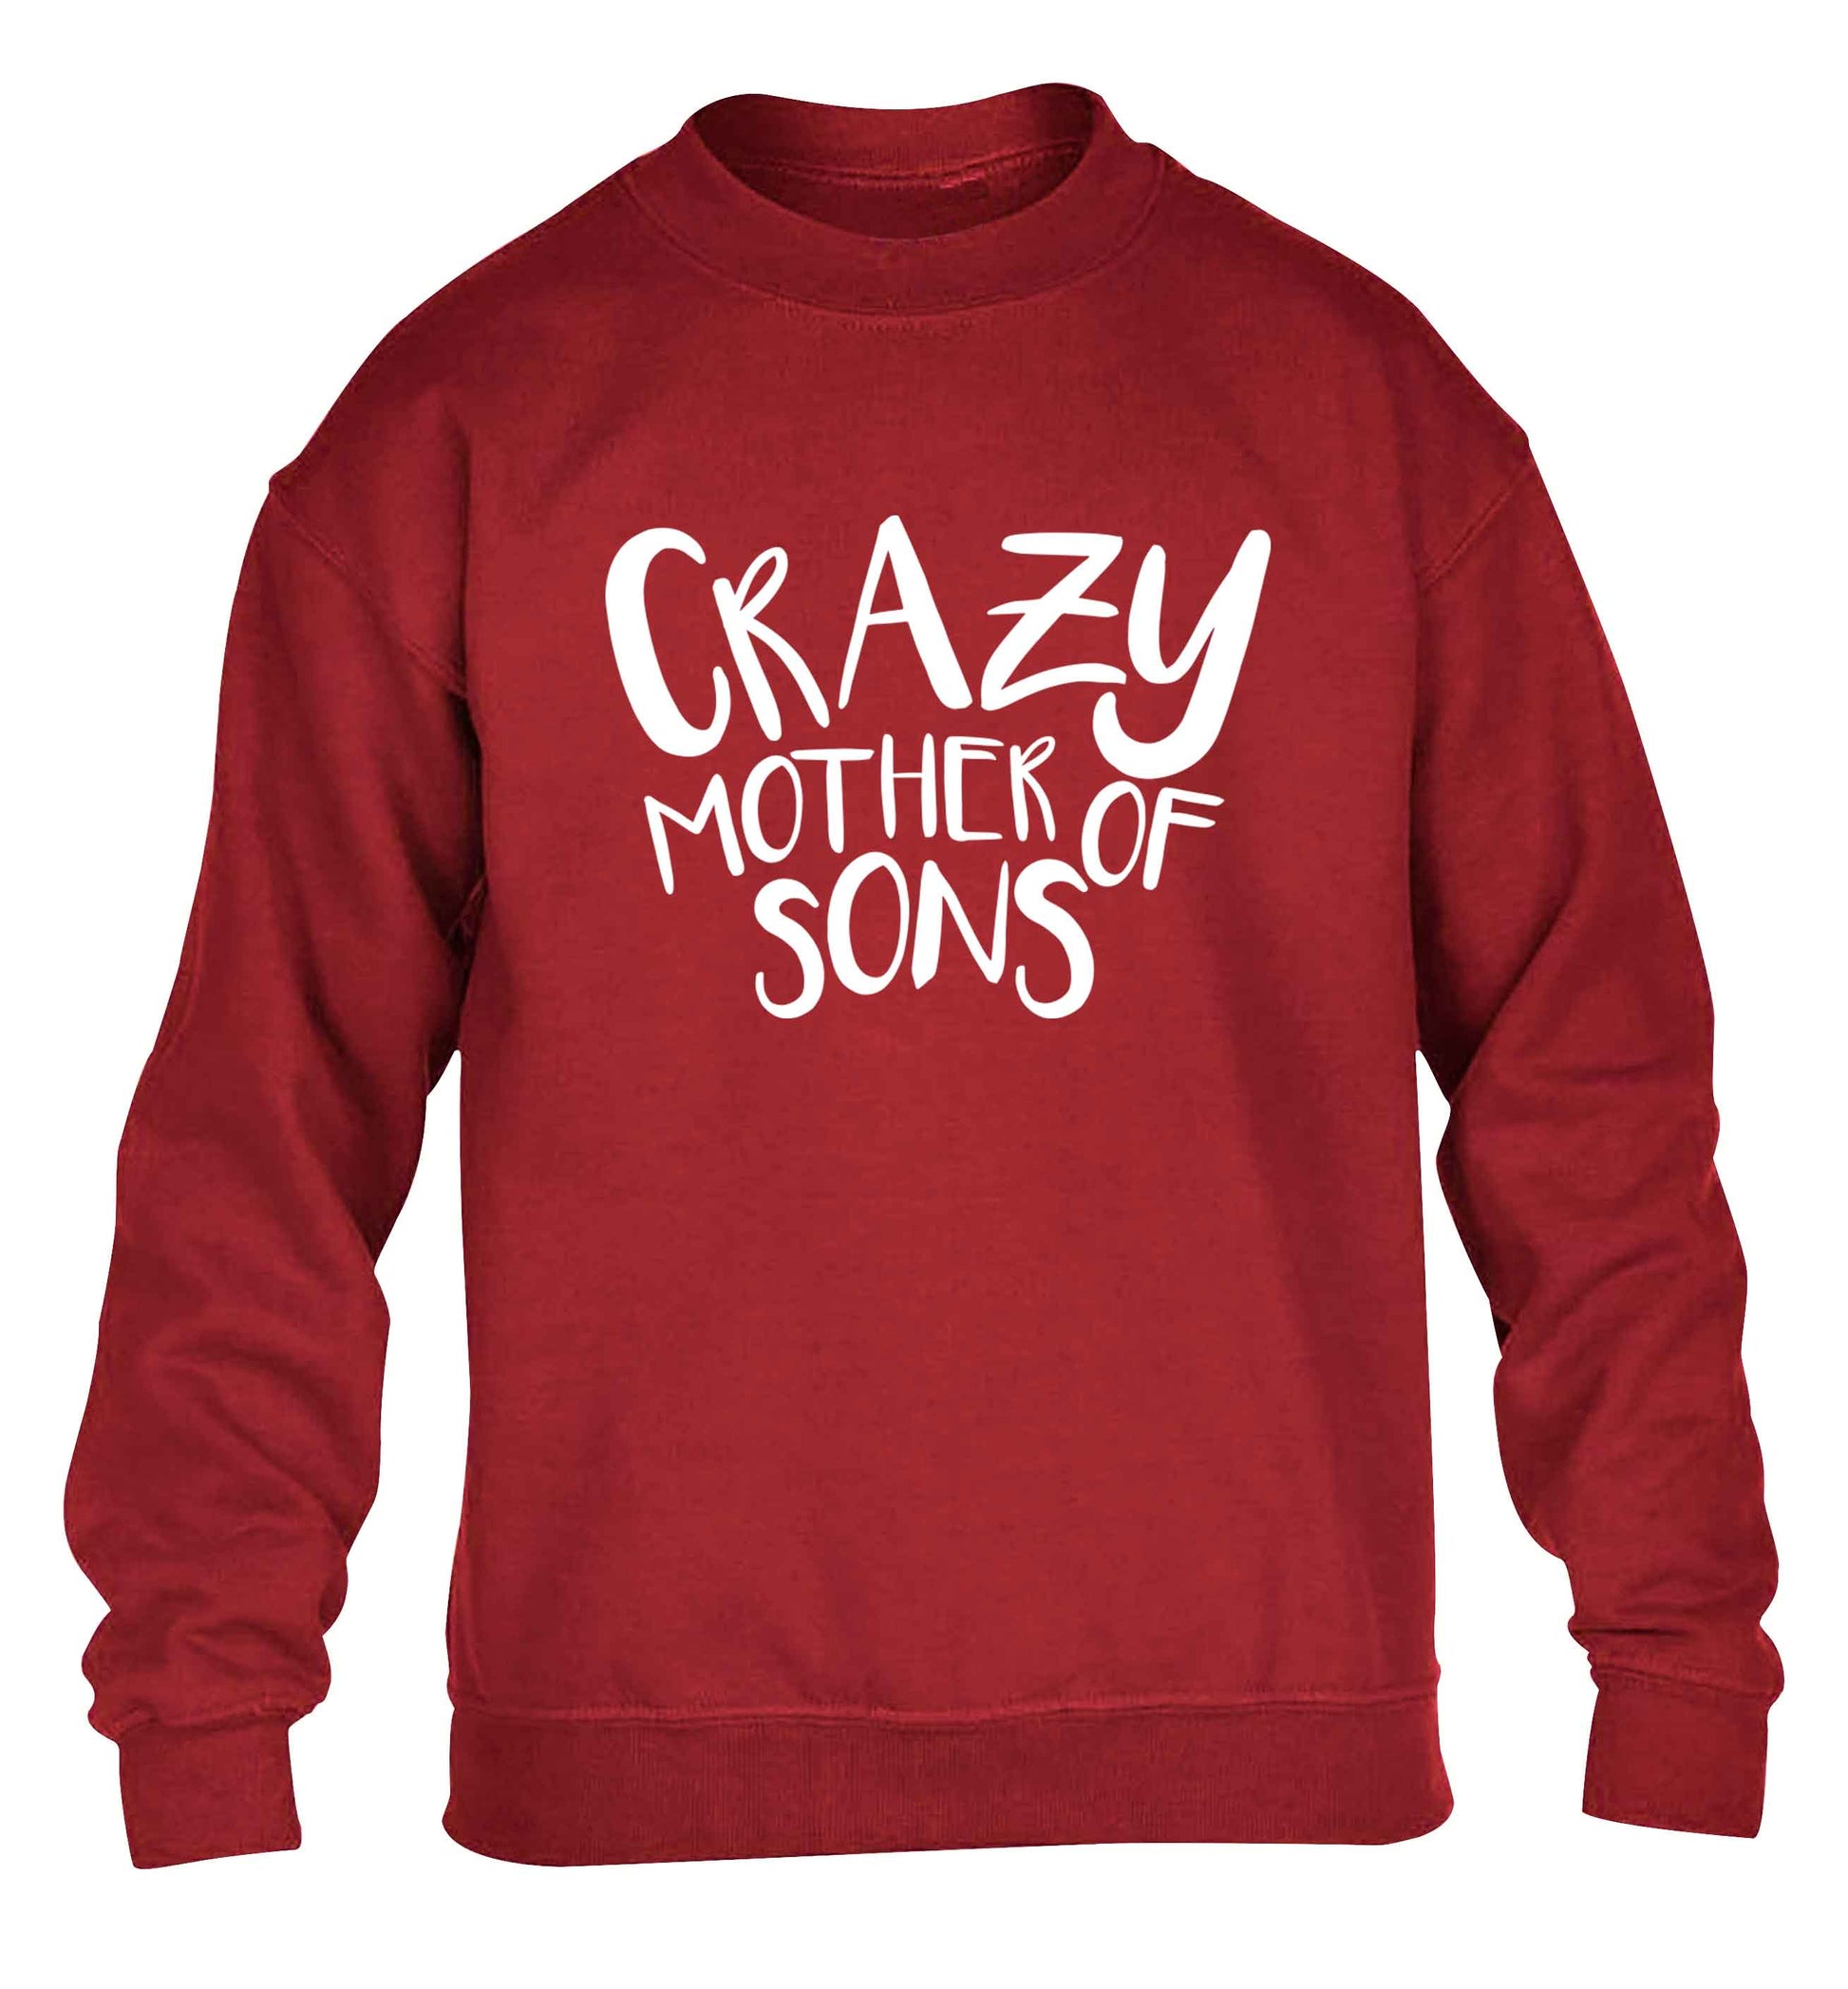 Crazy mother of sons children's grey sweater 12-13 Years